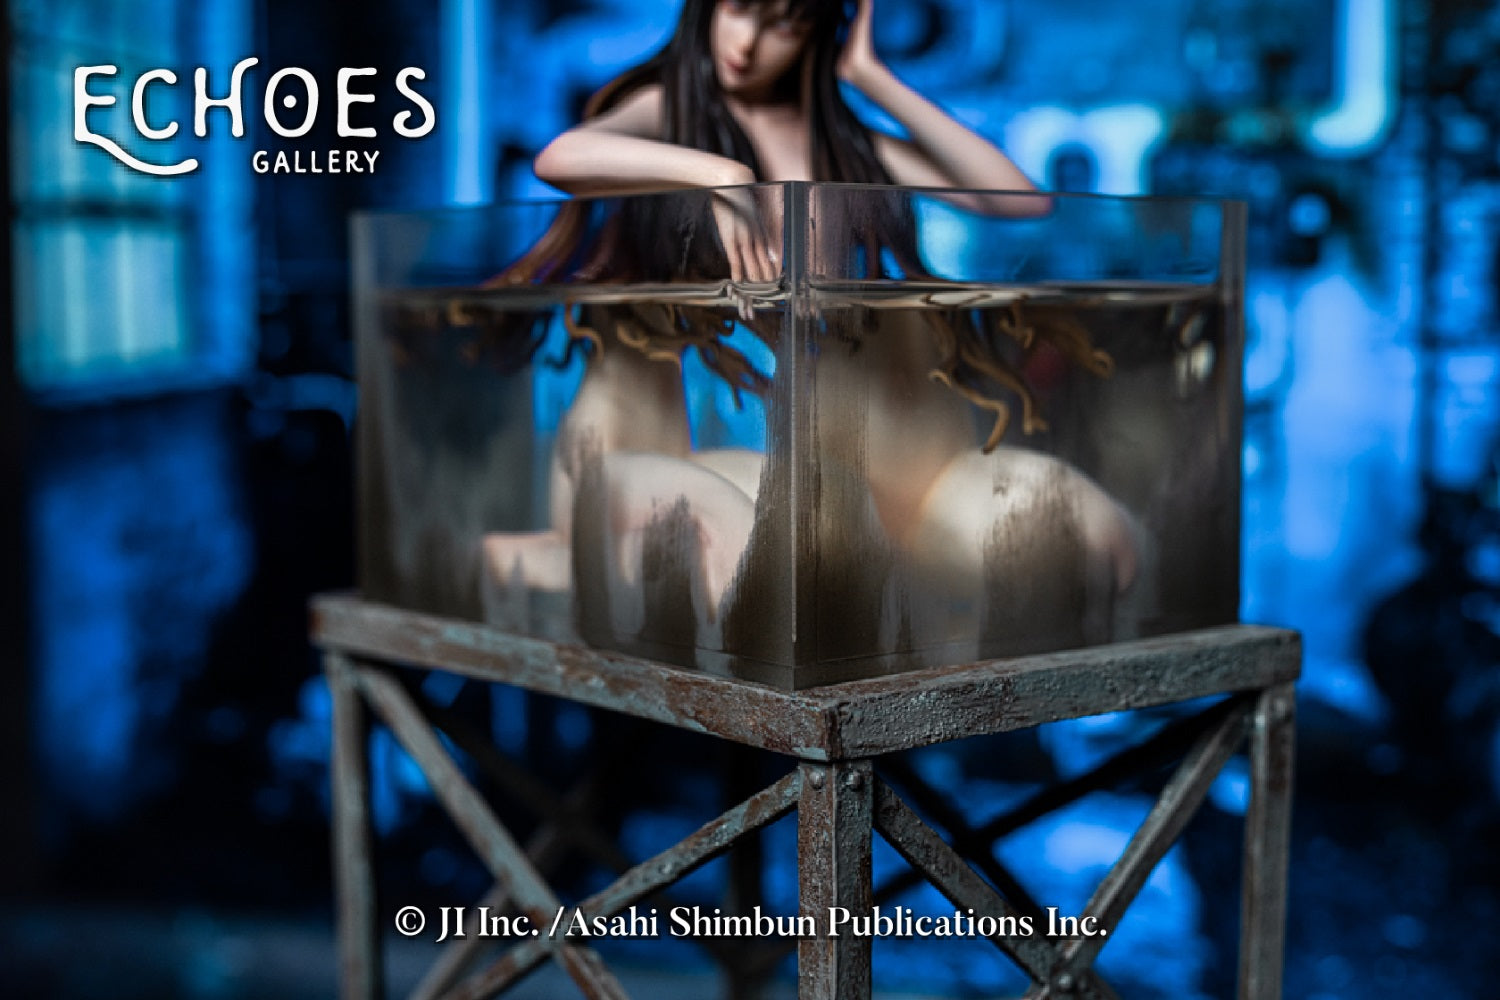 PRE-ORDER Echoes Gallery - Itou Junji: Collection - Kawakami Tomie